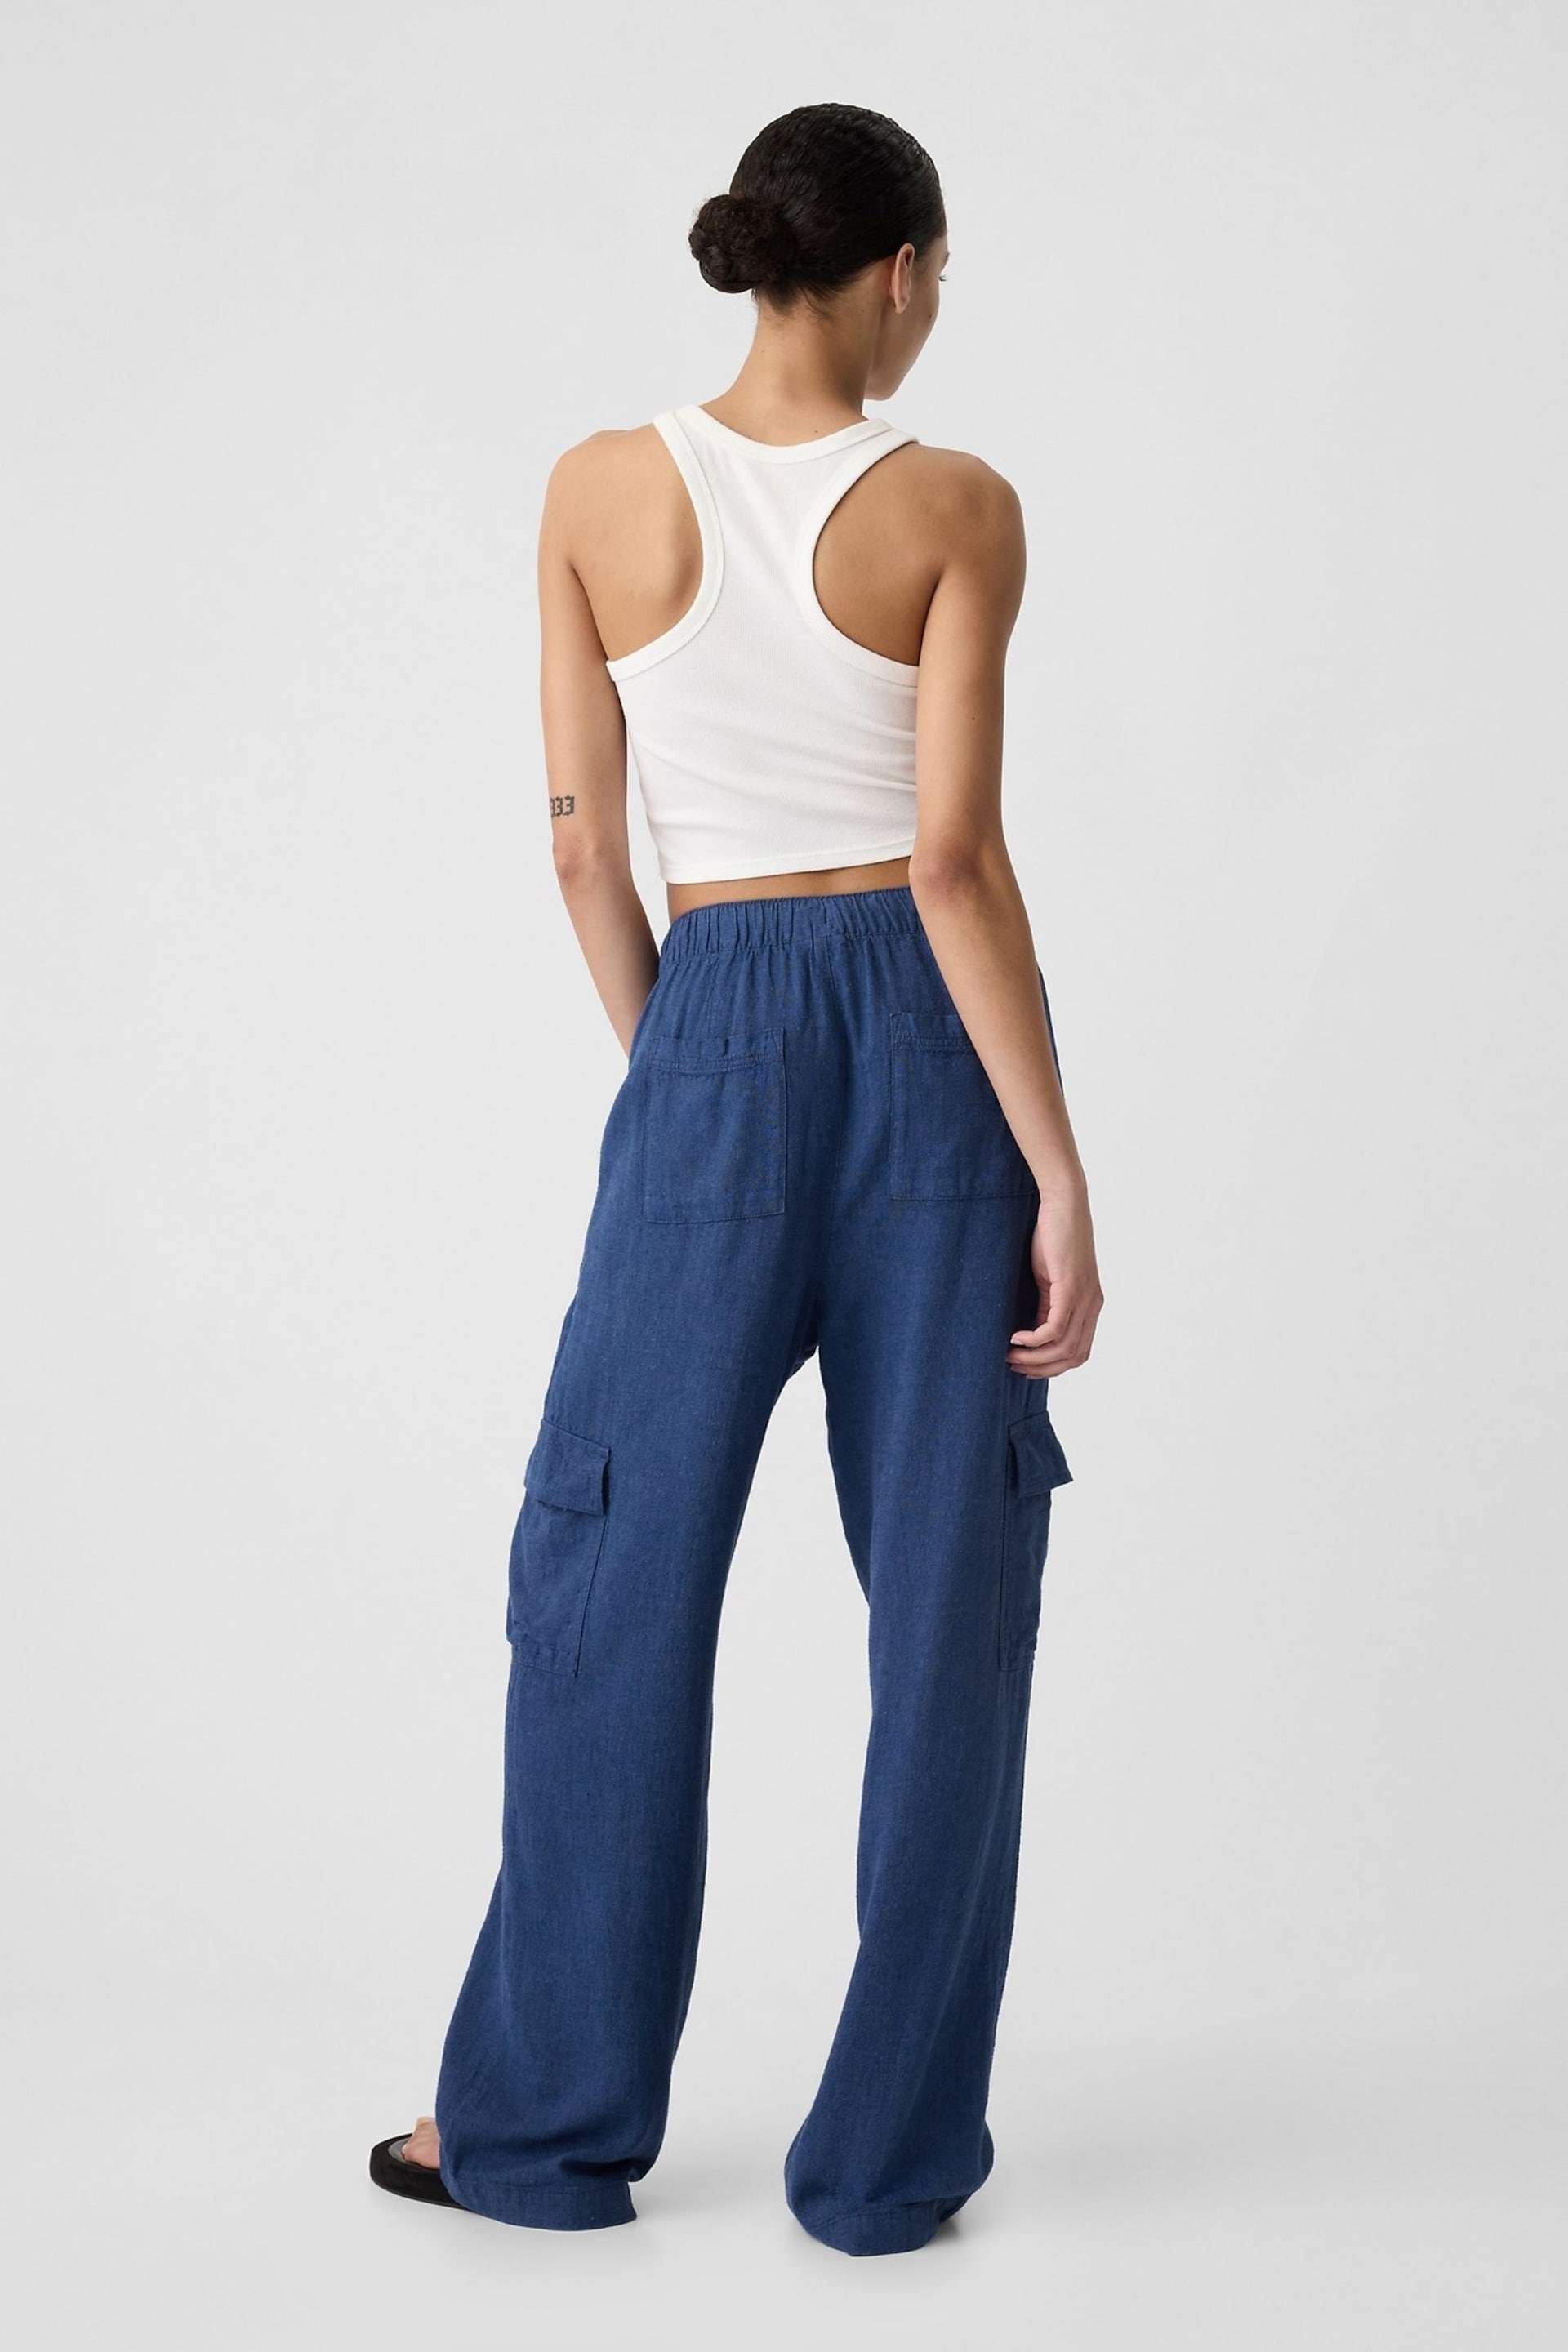 Gap Blue Linen Blend Wide Leg Cargo Pull On Trousers - Image 2 of 4